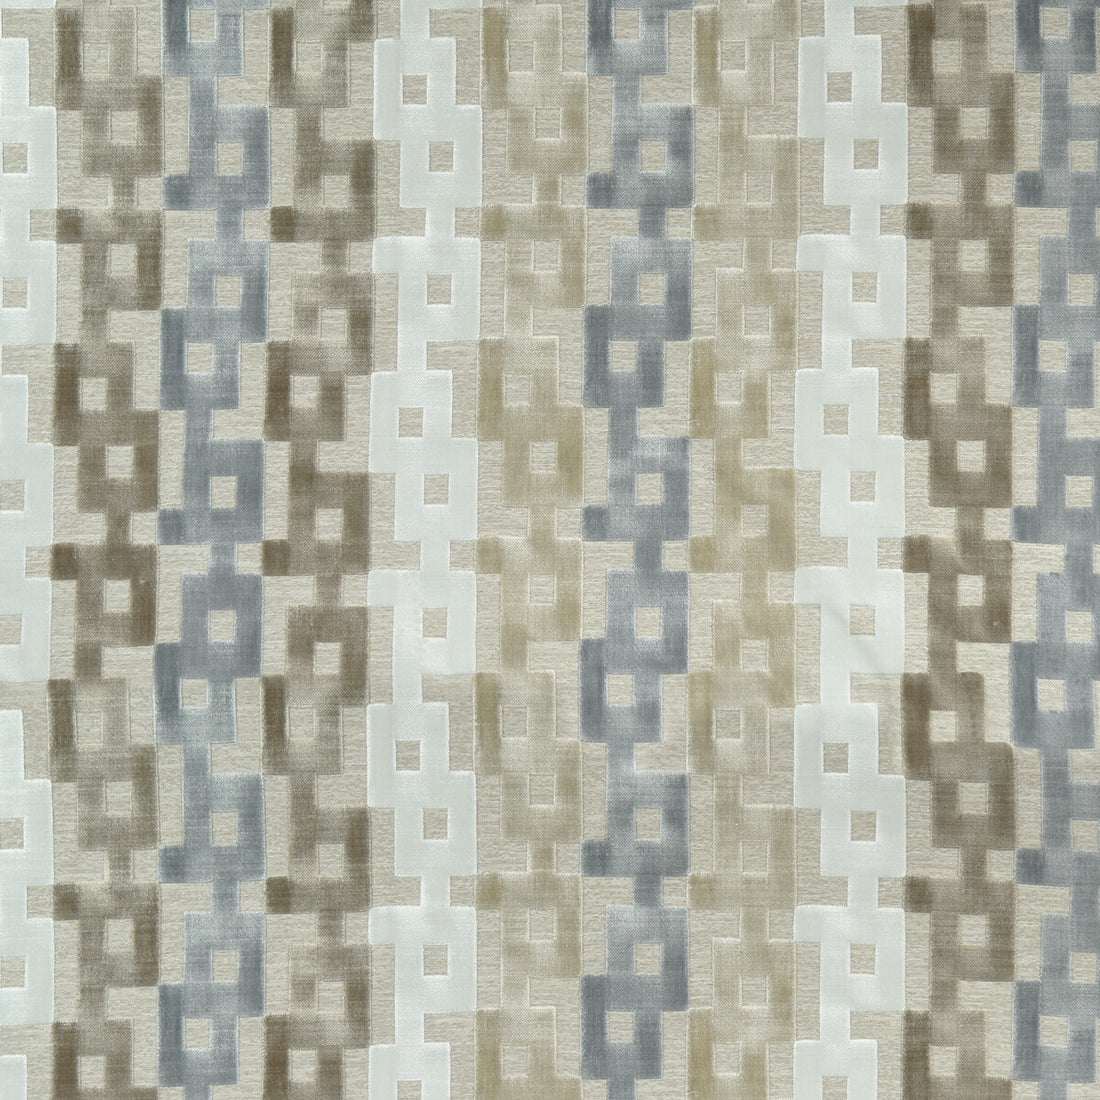 Chain Velvet fabric in natural color - pattern 35856.1611.0 - by Kravet Couture